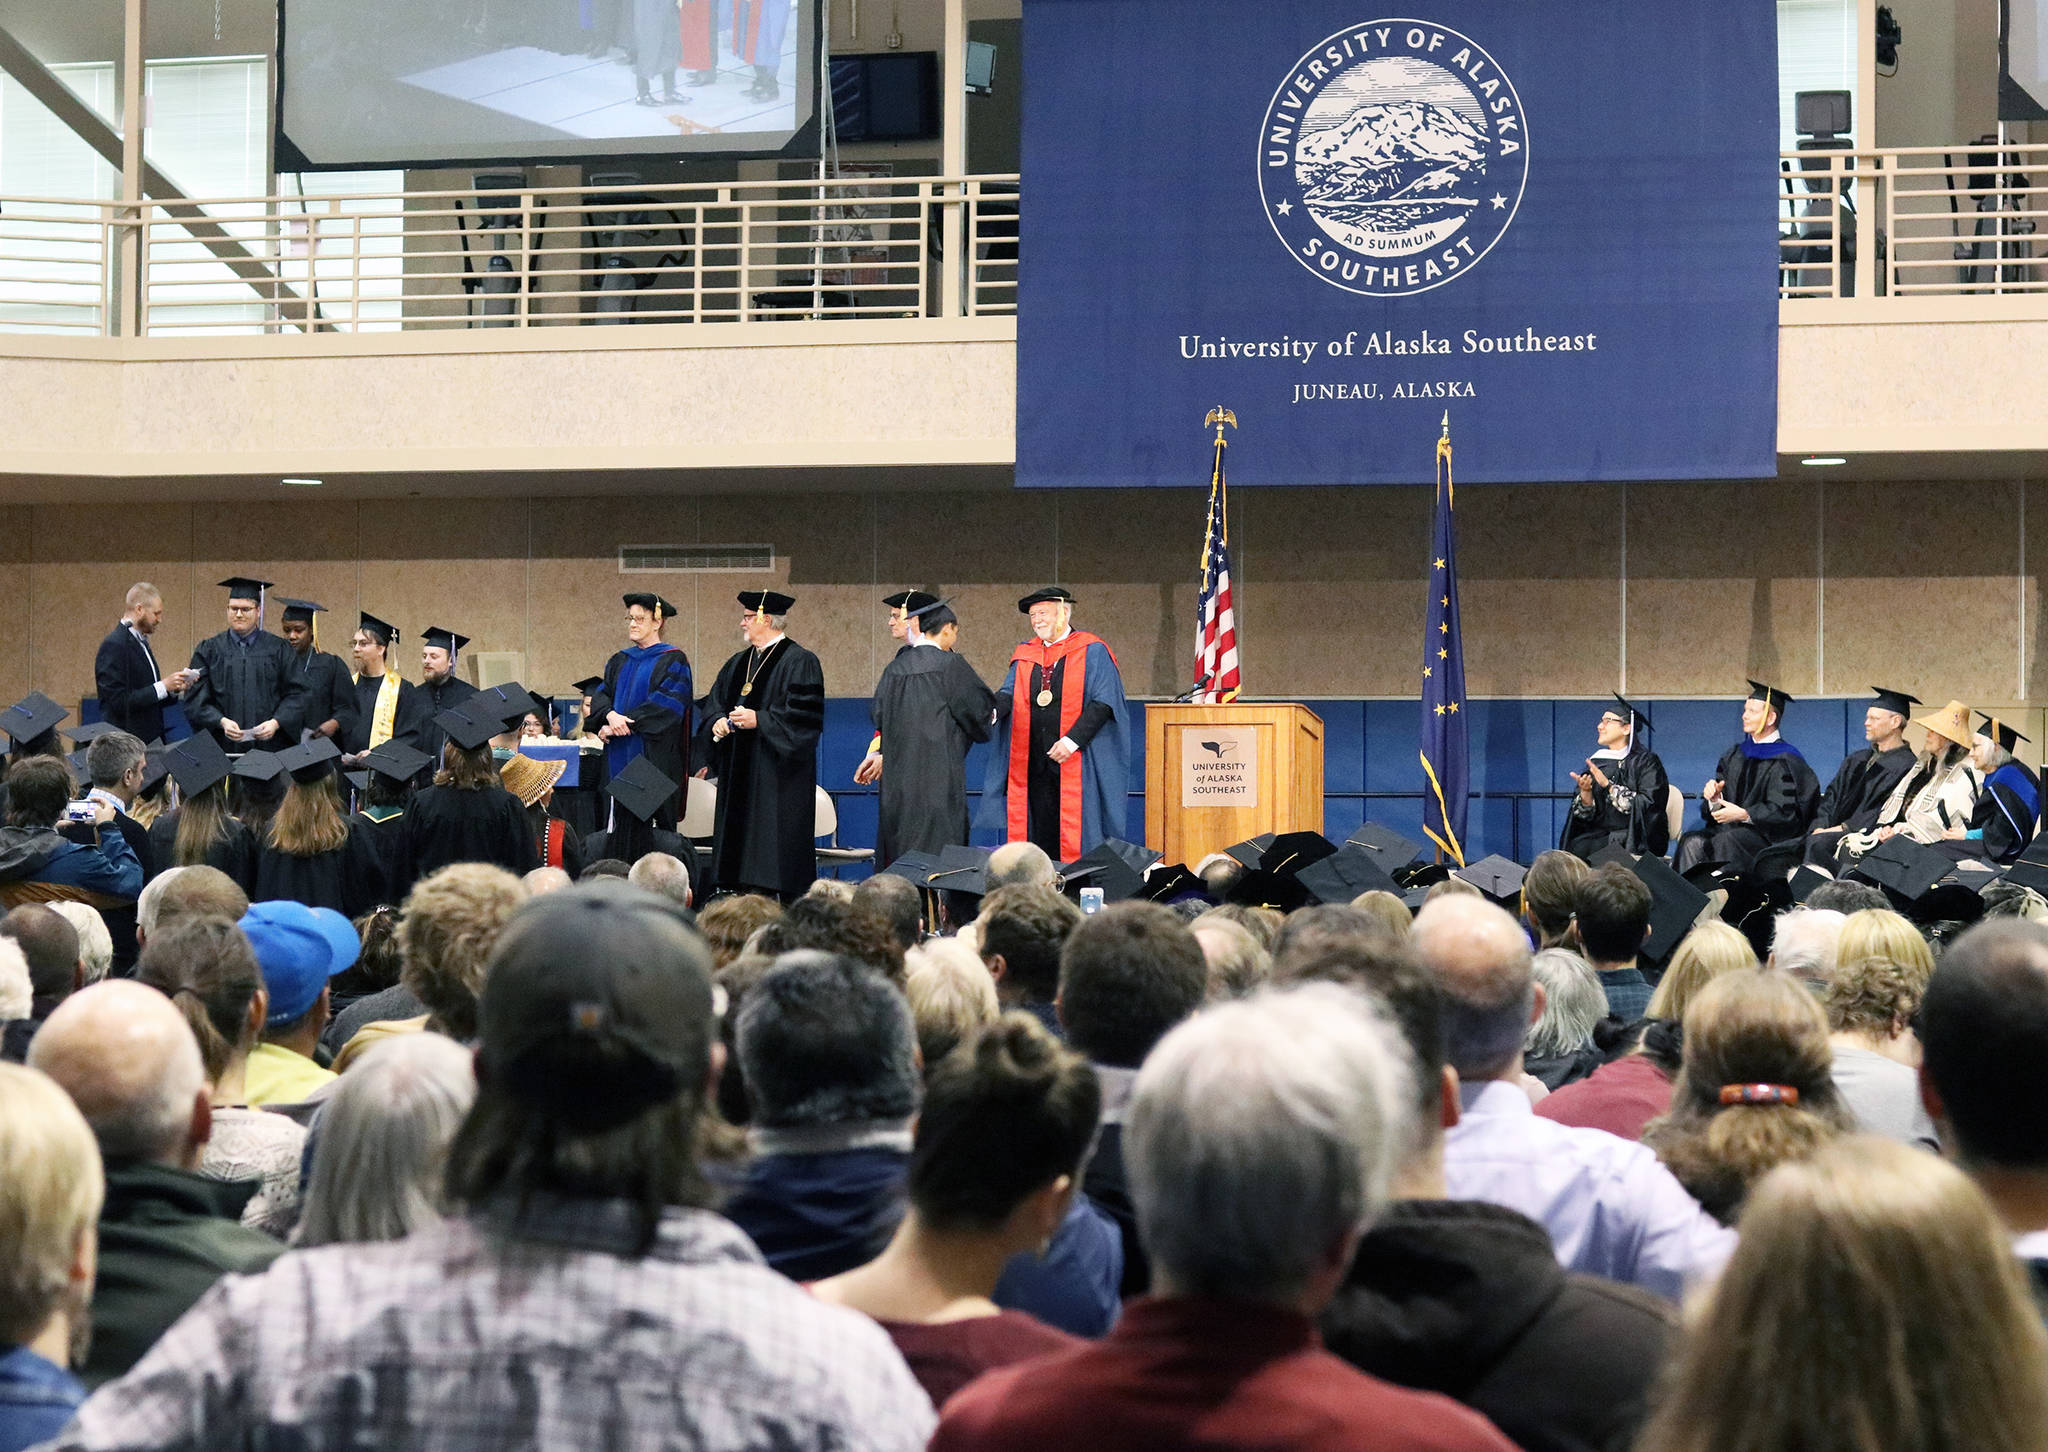 The University of Alaska Southeast Recreation Center was packed with graduates, faculty, family and friends during the commencement ceremony on Sunday, May 5, 2019. (Erin Laughlin | For the Juneau Empire)